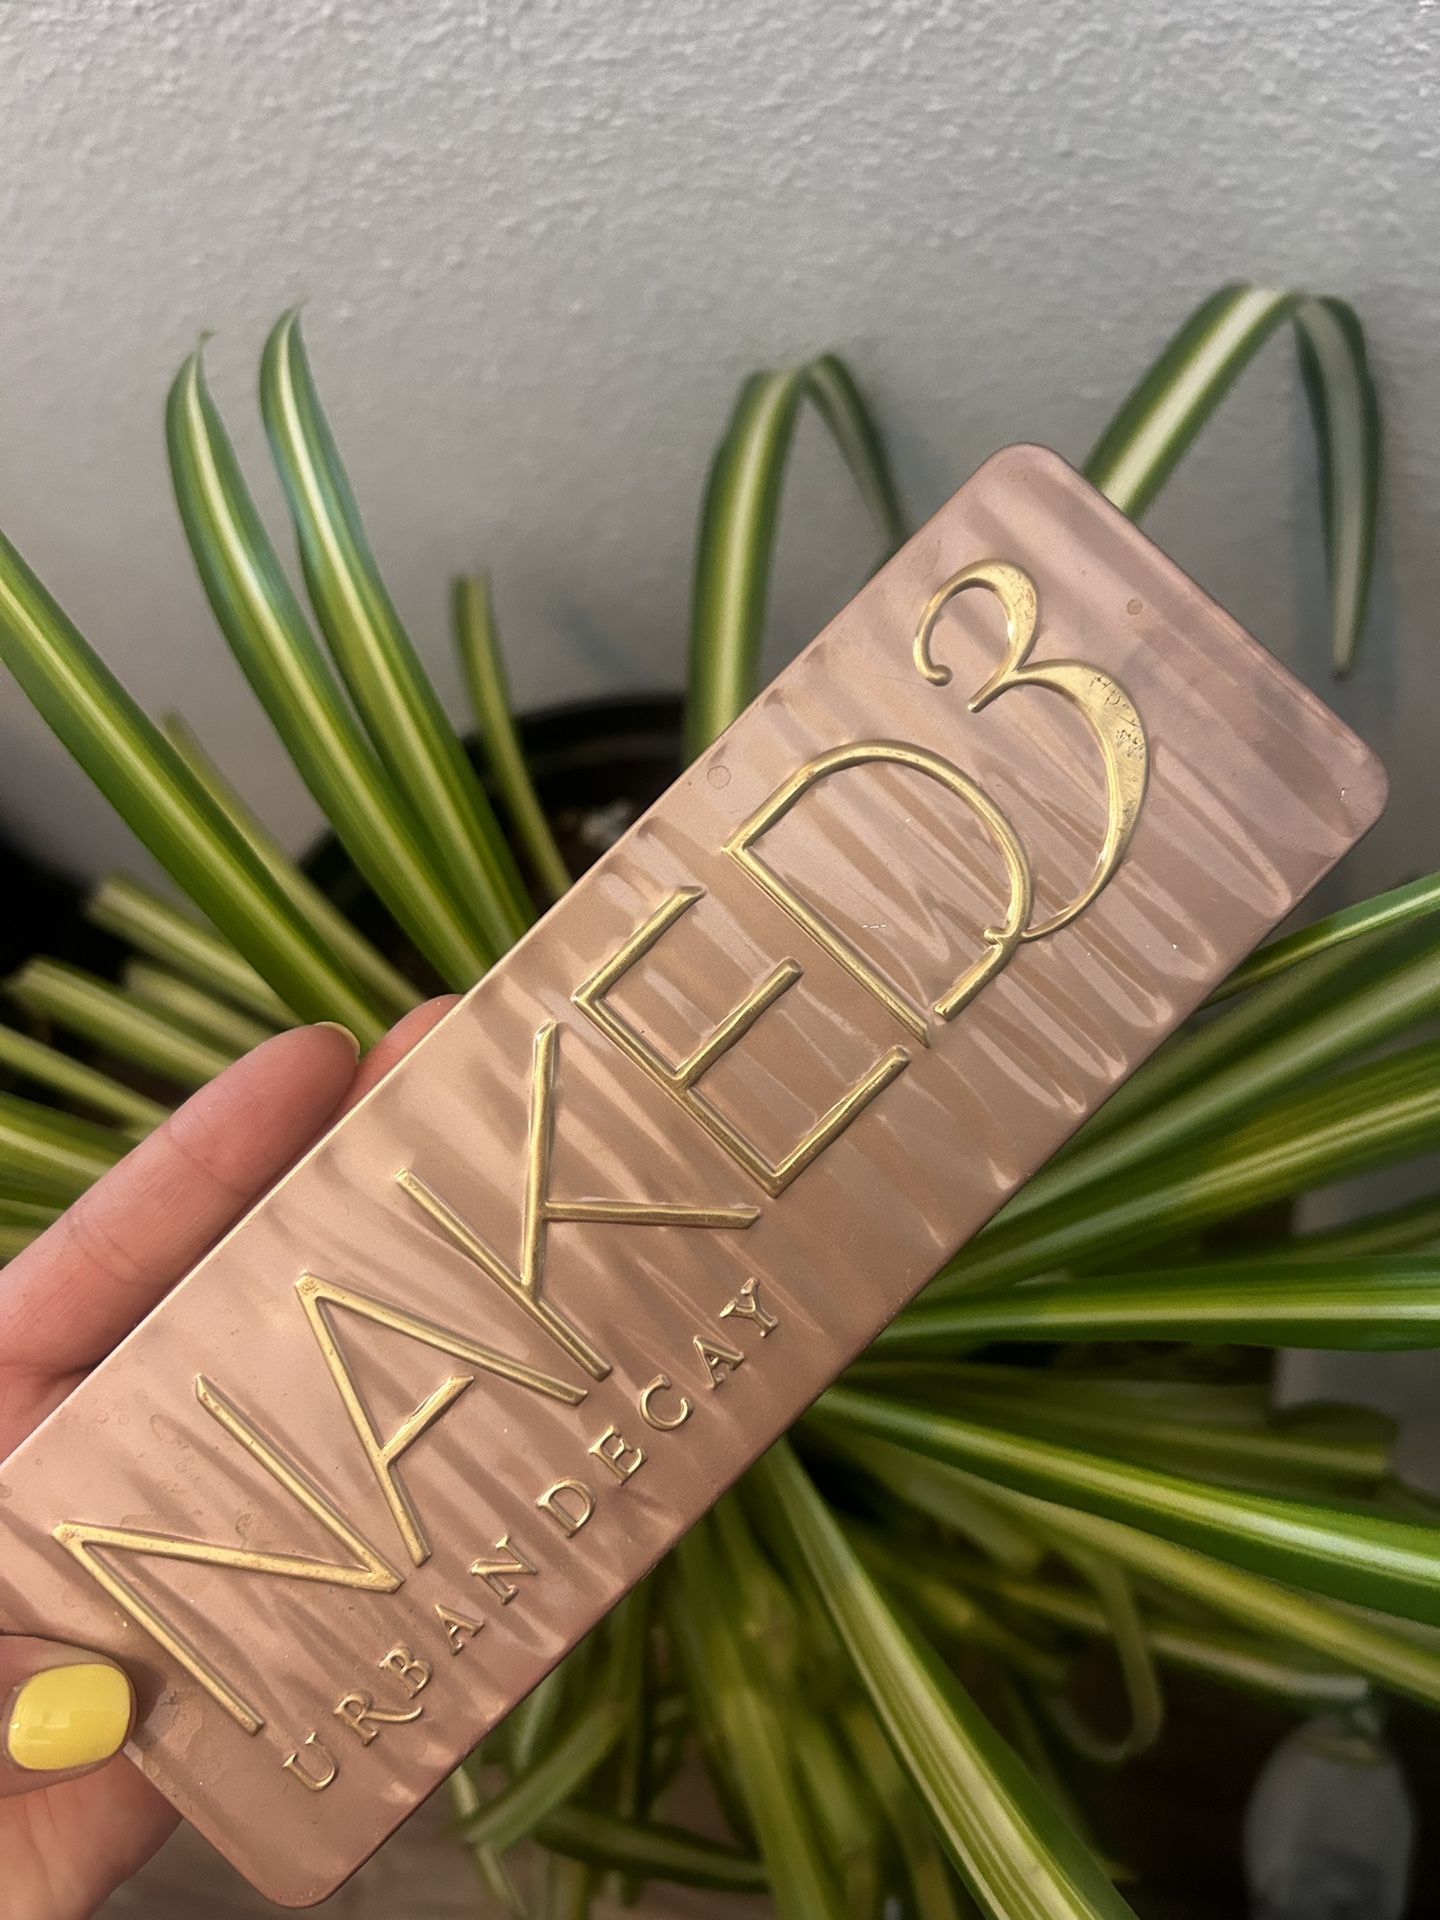 Naked 3 Urban Decay Palette 